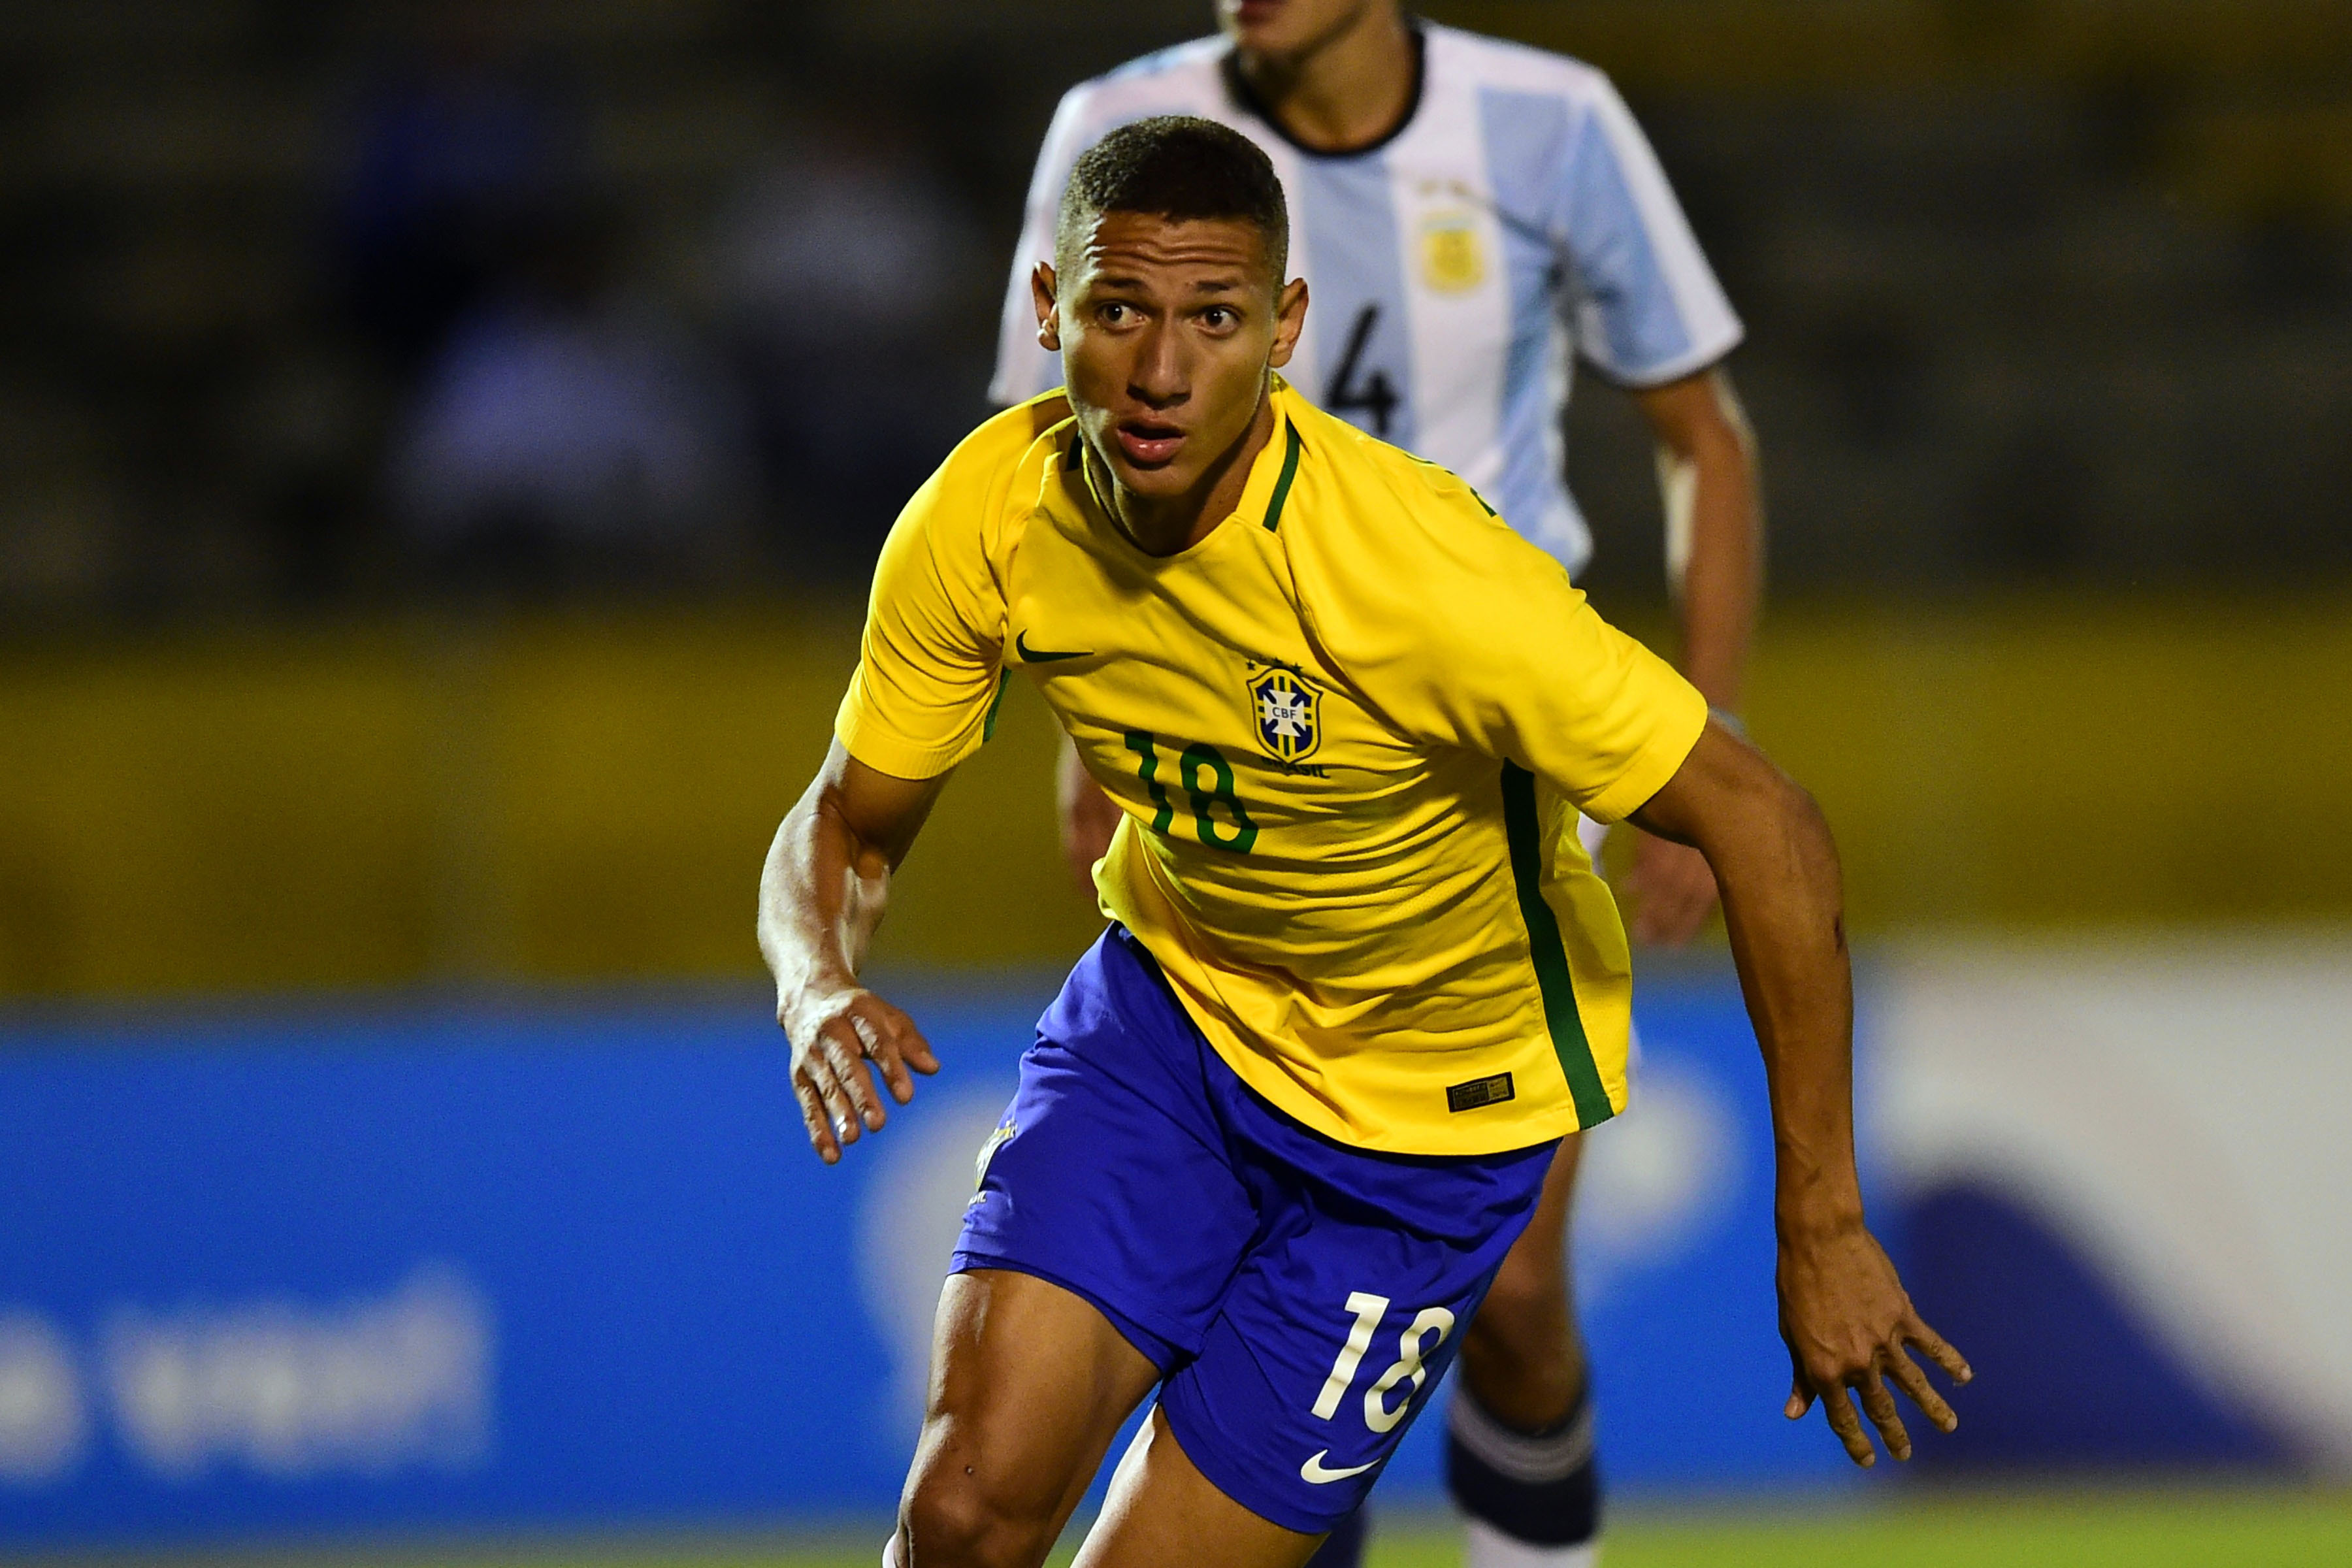 Brazil's player Richarlison (front) celebrates his goal against Argentina during their South American Championship U-20 football match in the Olimpico Atahualpa stadium in Quito on February 8, 2017. / AFP / RODRIGO BUENDIA        (Photo credit should read RODRIGO BUENDIA/AFP/Getty Images)